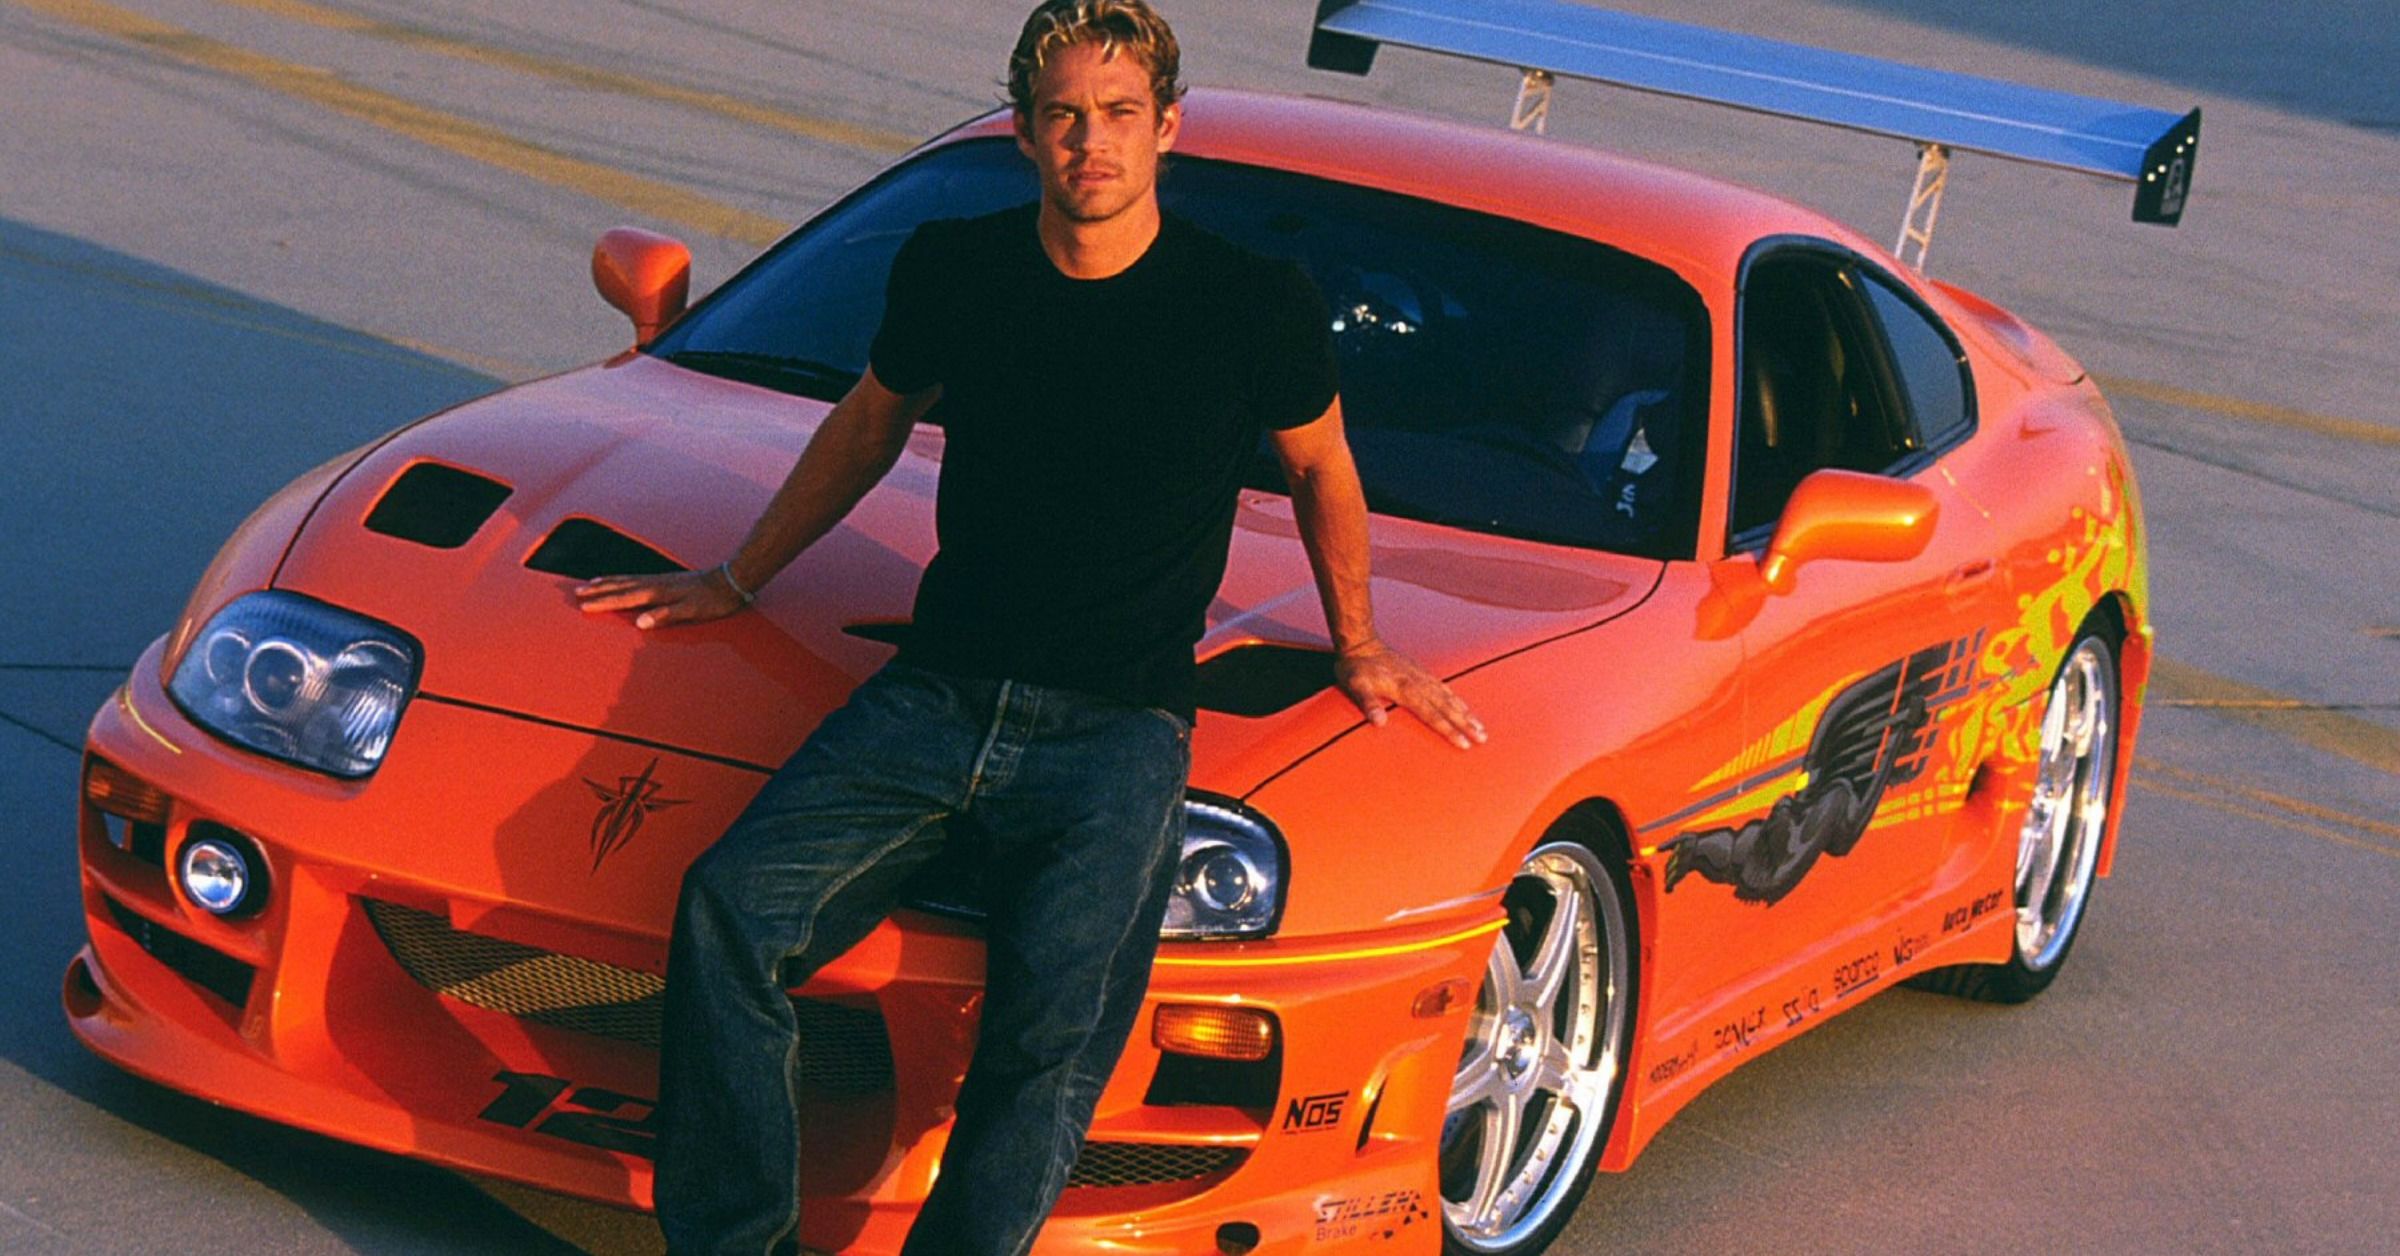 Paul Walker S Toyota Supra From Fast And Furious Sells For Record Hot